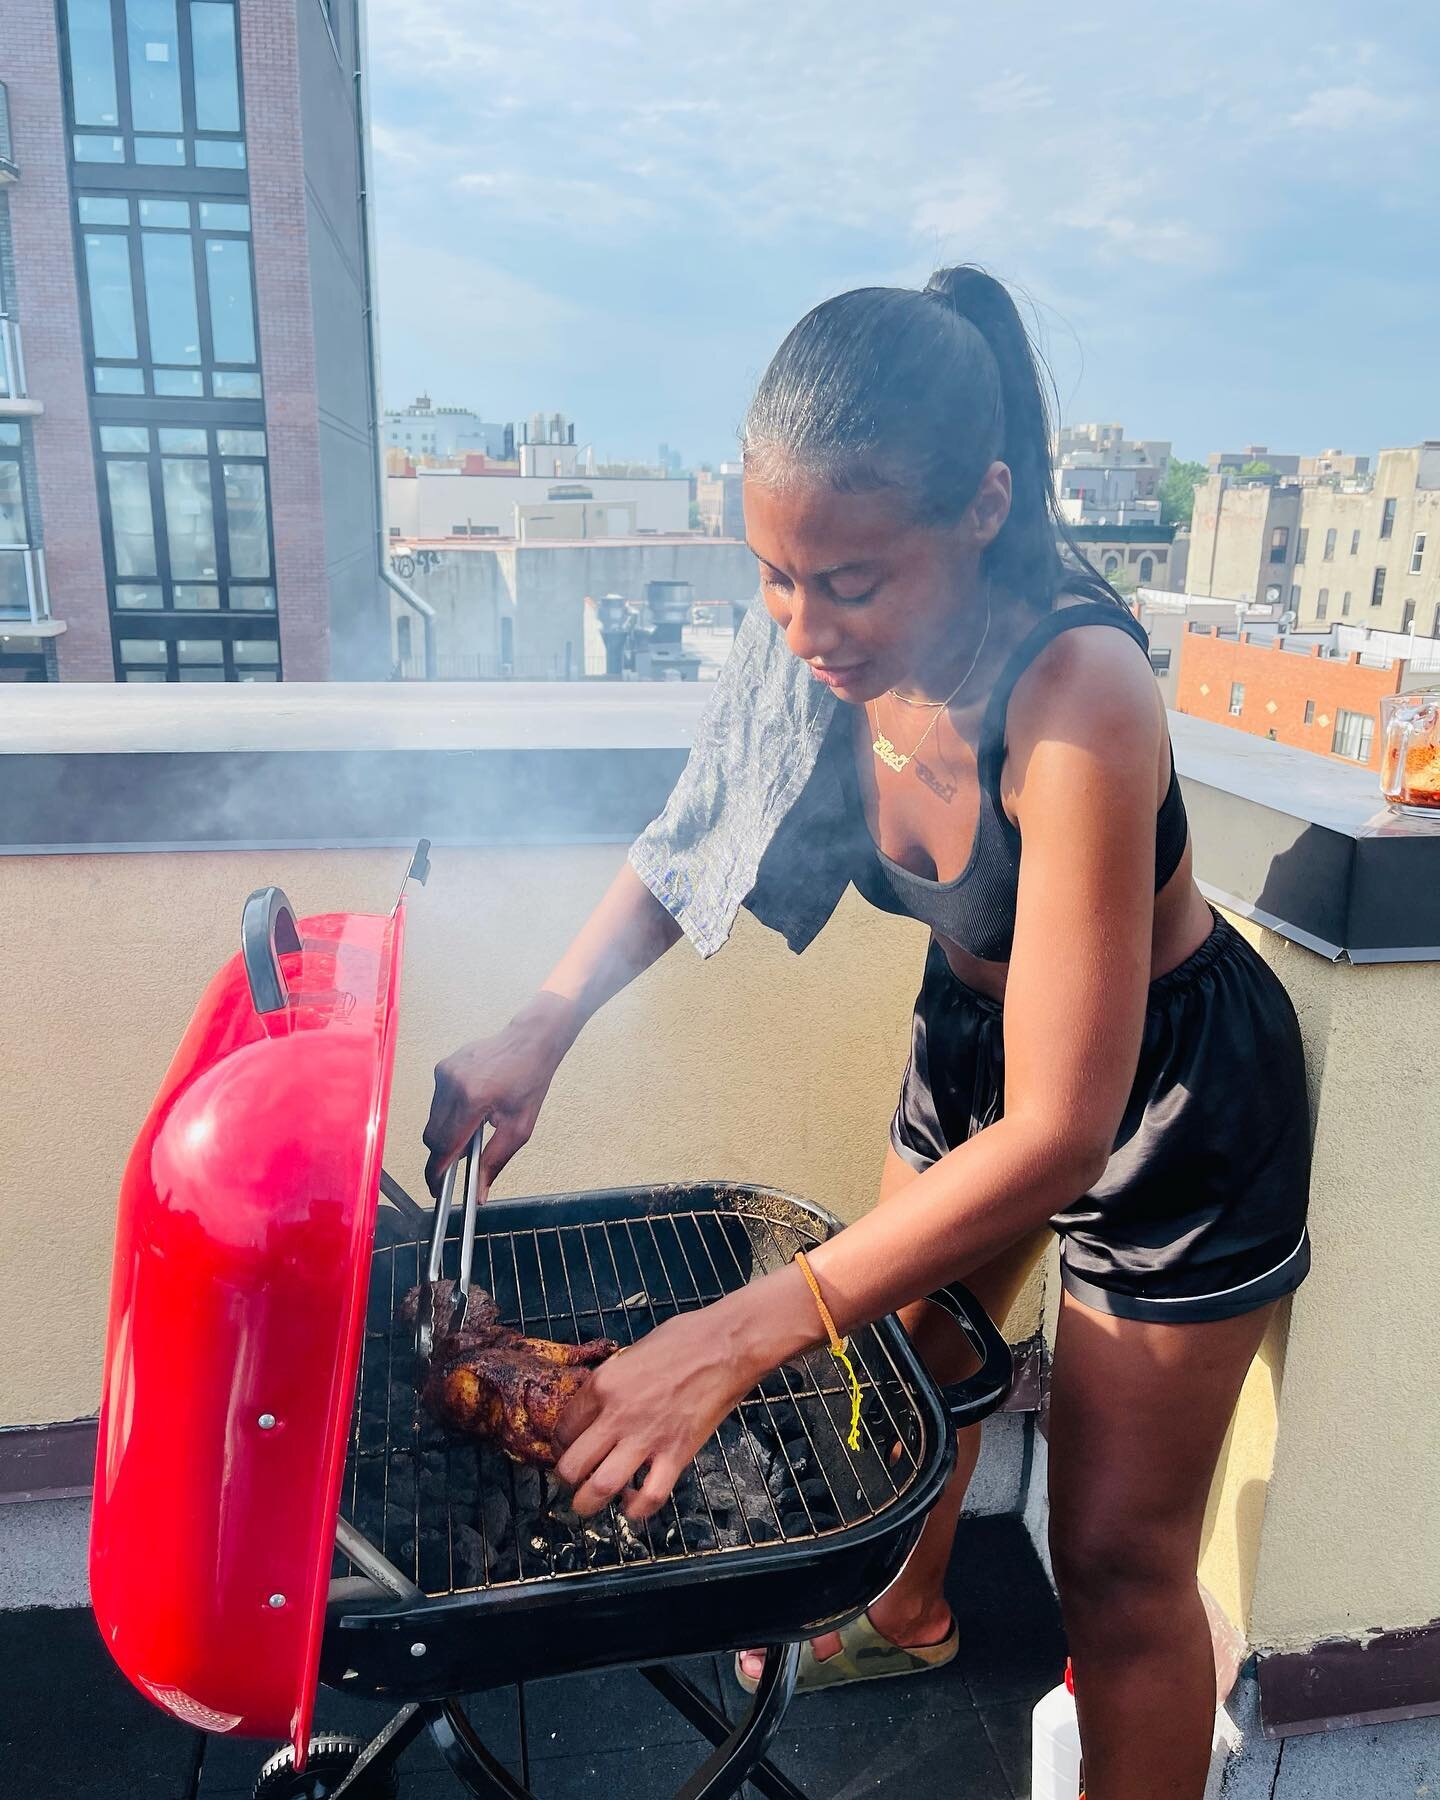 my first grilling session &amp; i was hype af! i needed some man help getting the charcoals actually lit 😂 but after it was a success, our grill is small but mighty! wait until I actually get some land &amp; have a big ass smoker...i&rsquo;m determi